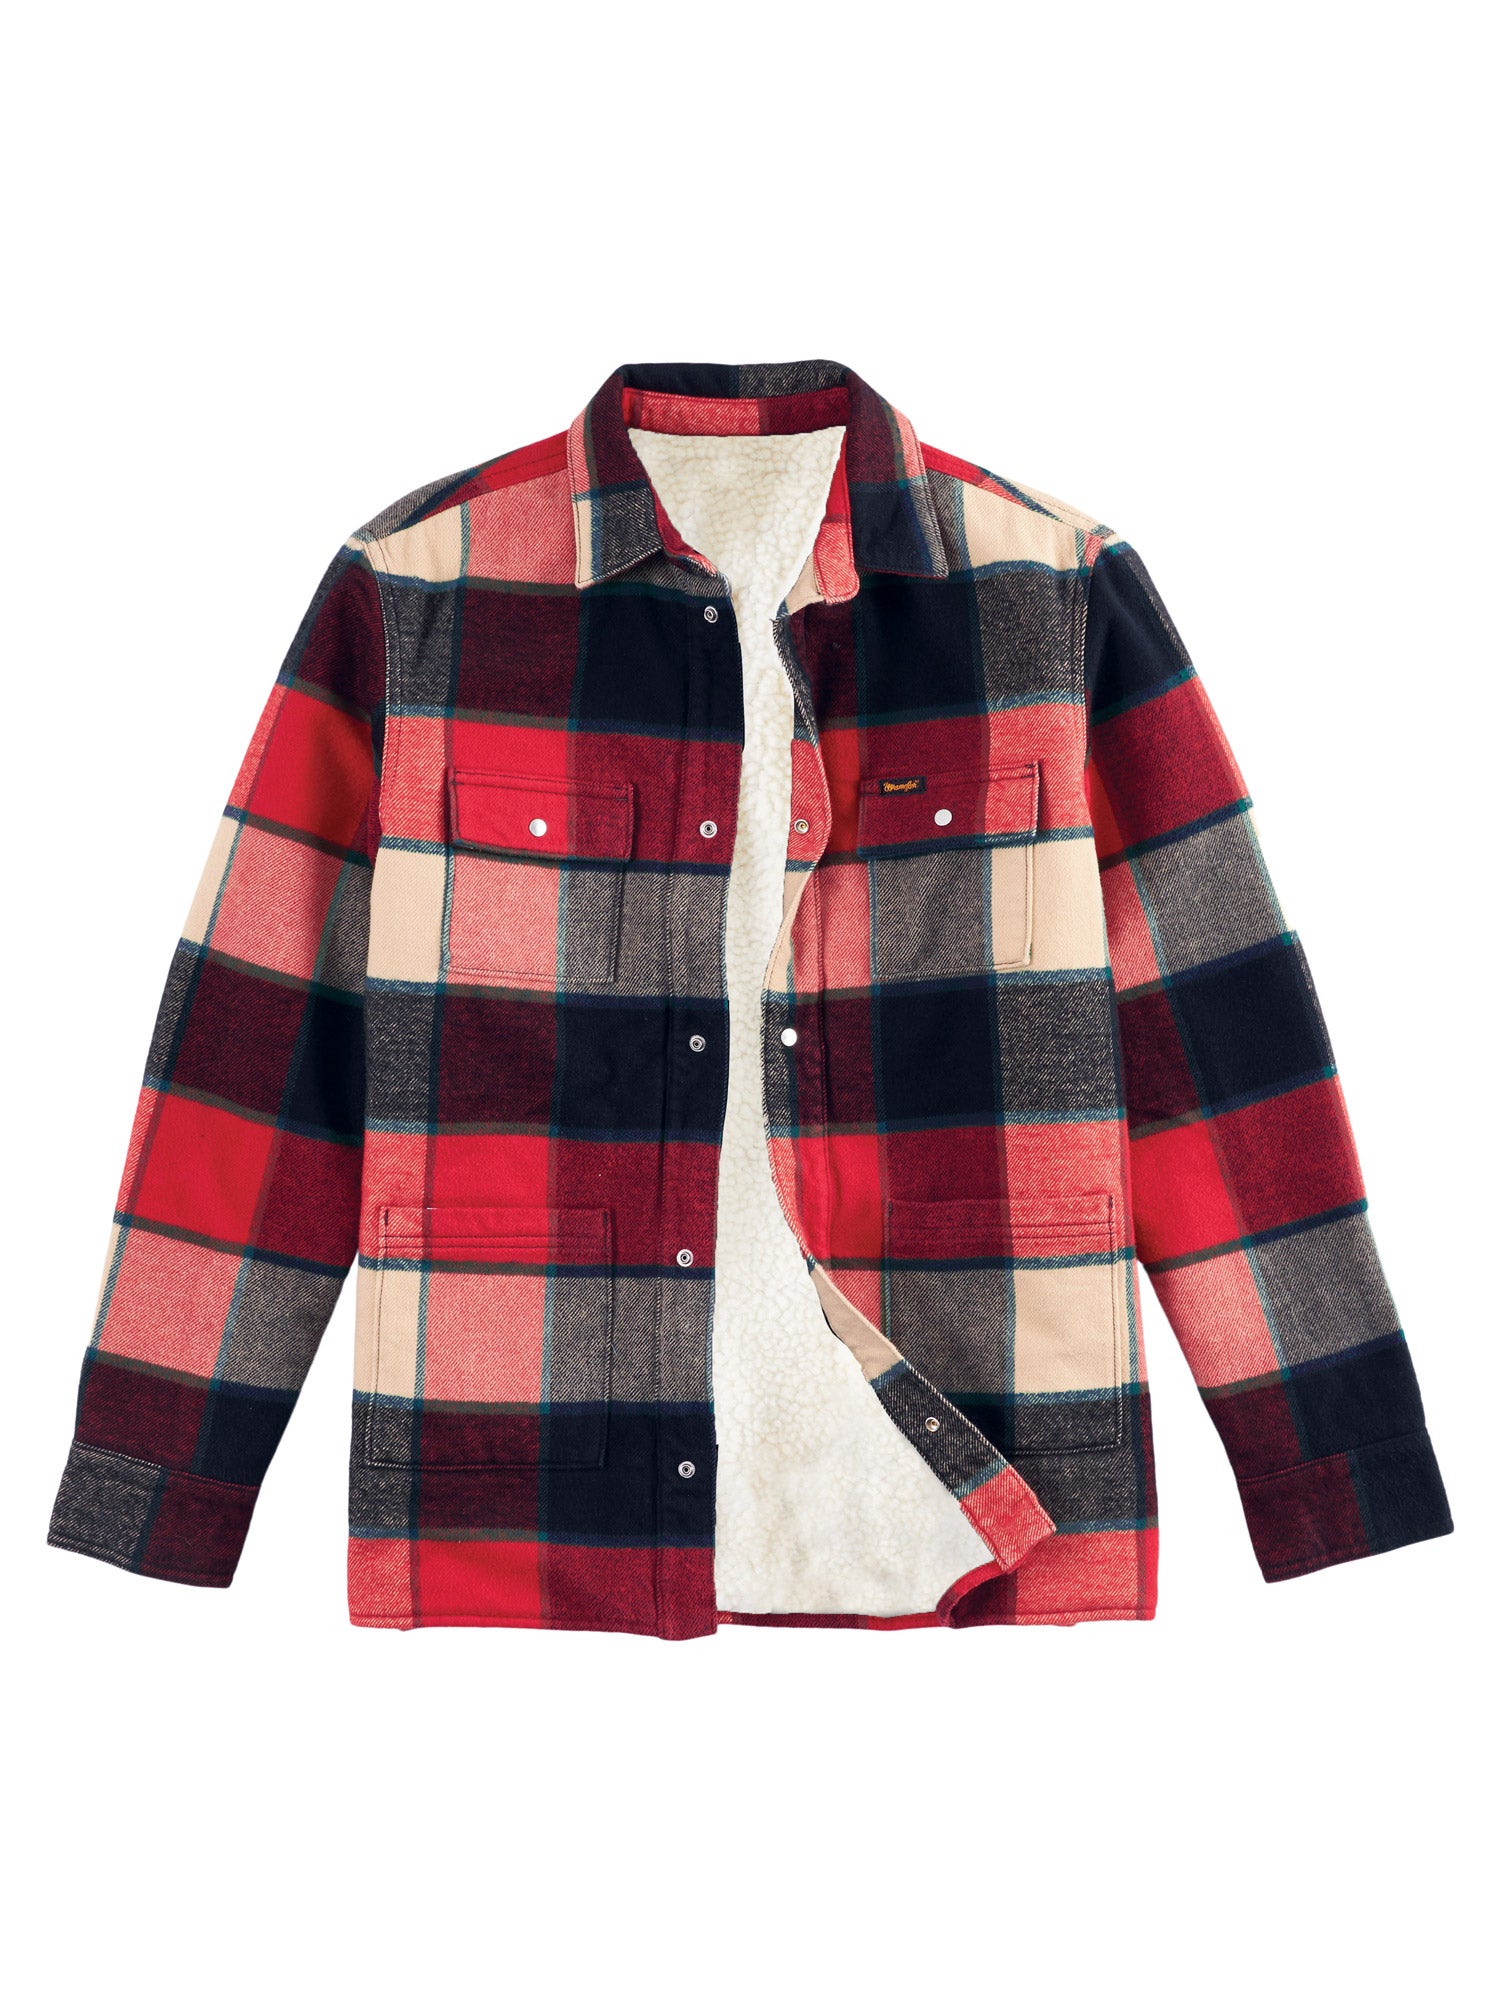 Wrangler 112318490 Sherpa Lined Flannel Jacket in Racing Red Plaid﻿ Front View